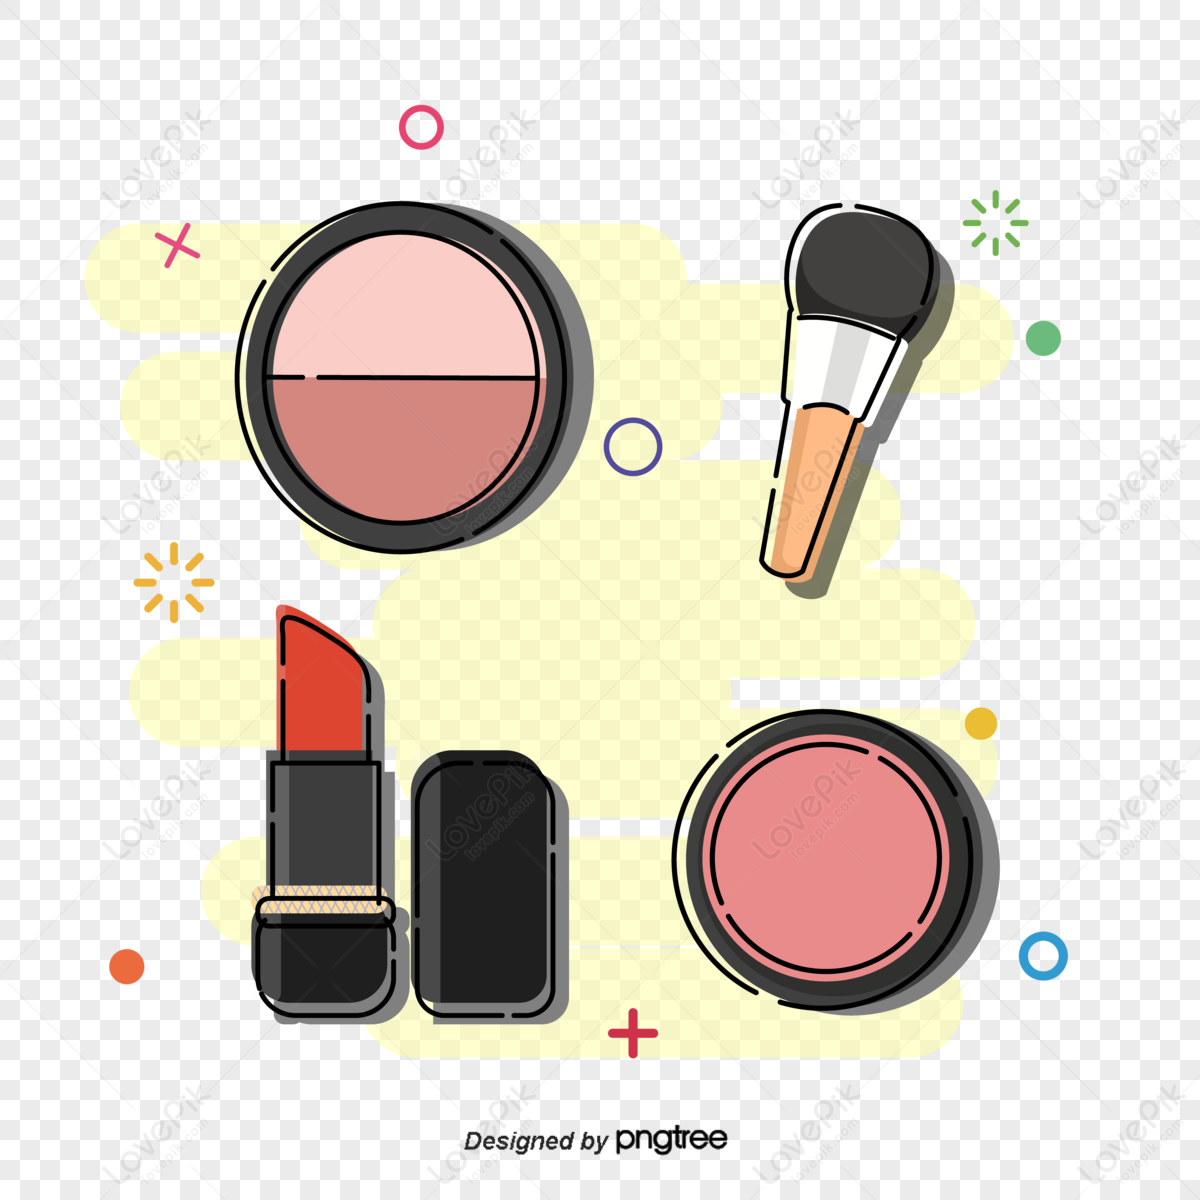 Cartoon Cosmetics PNG Images With Transparent Background